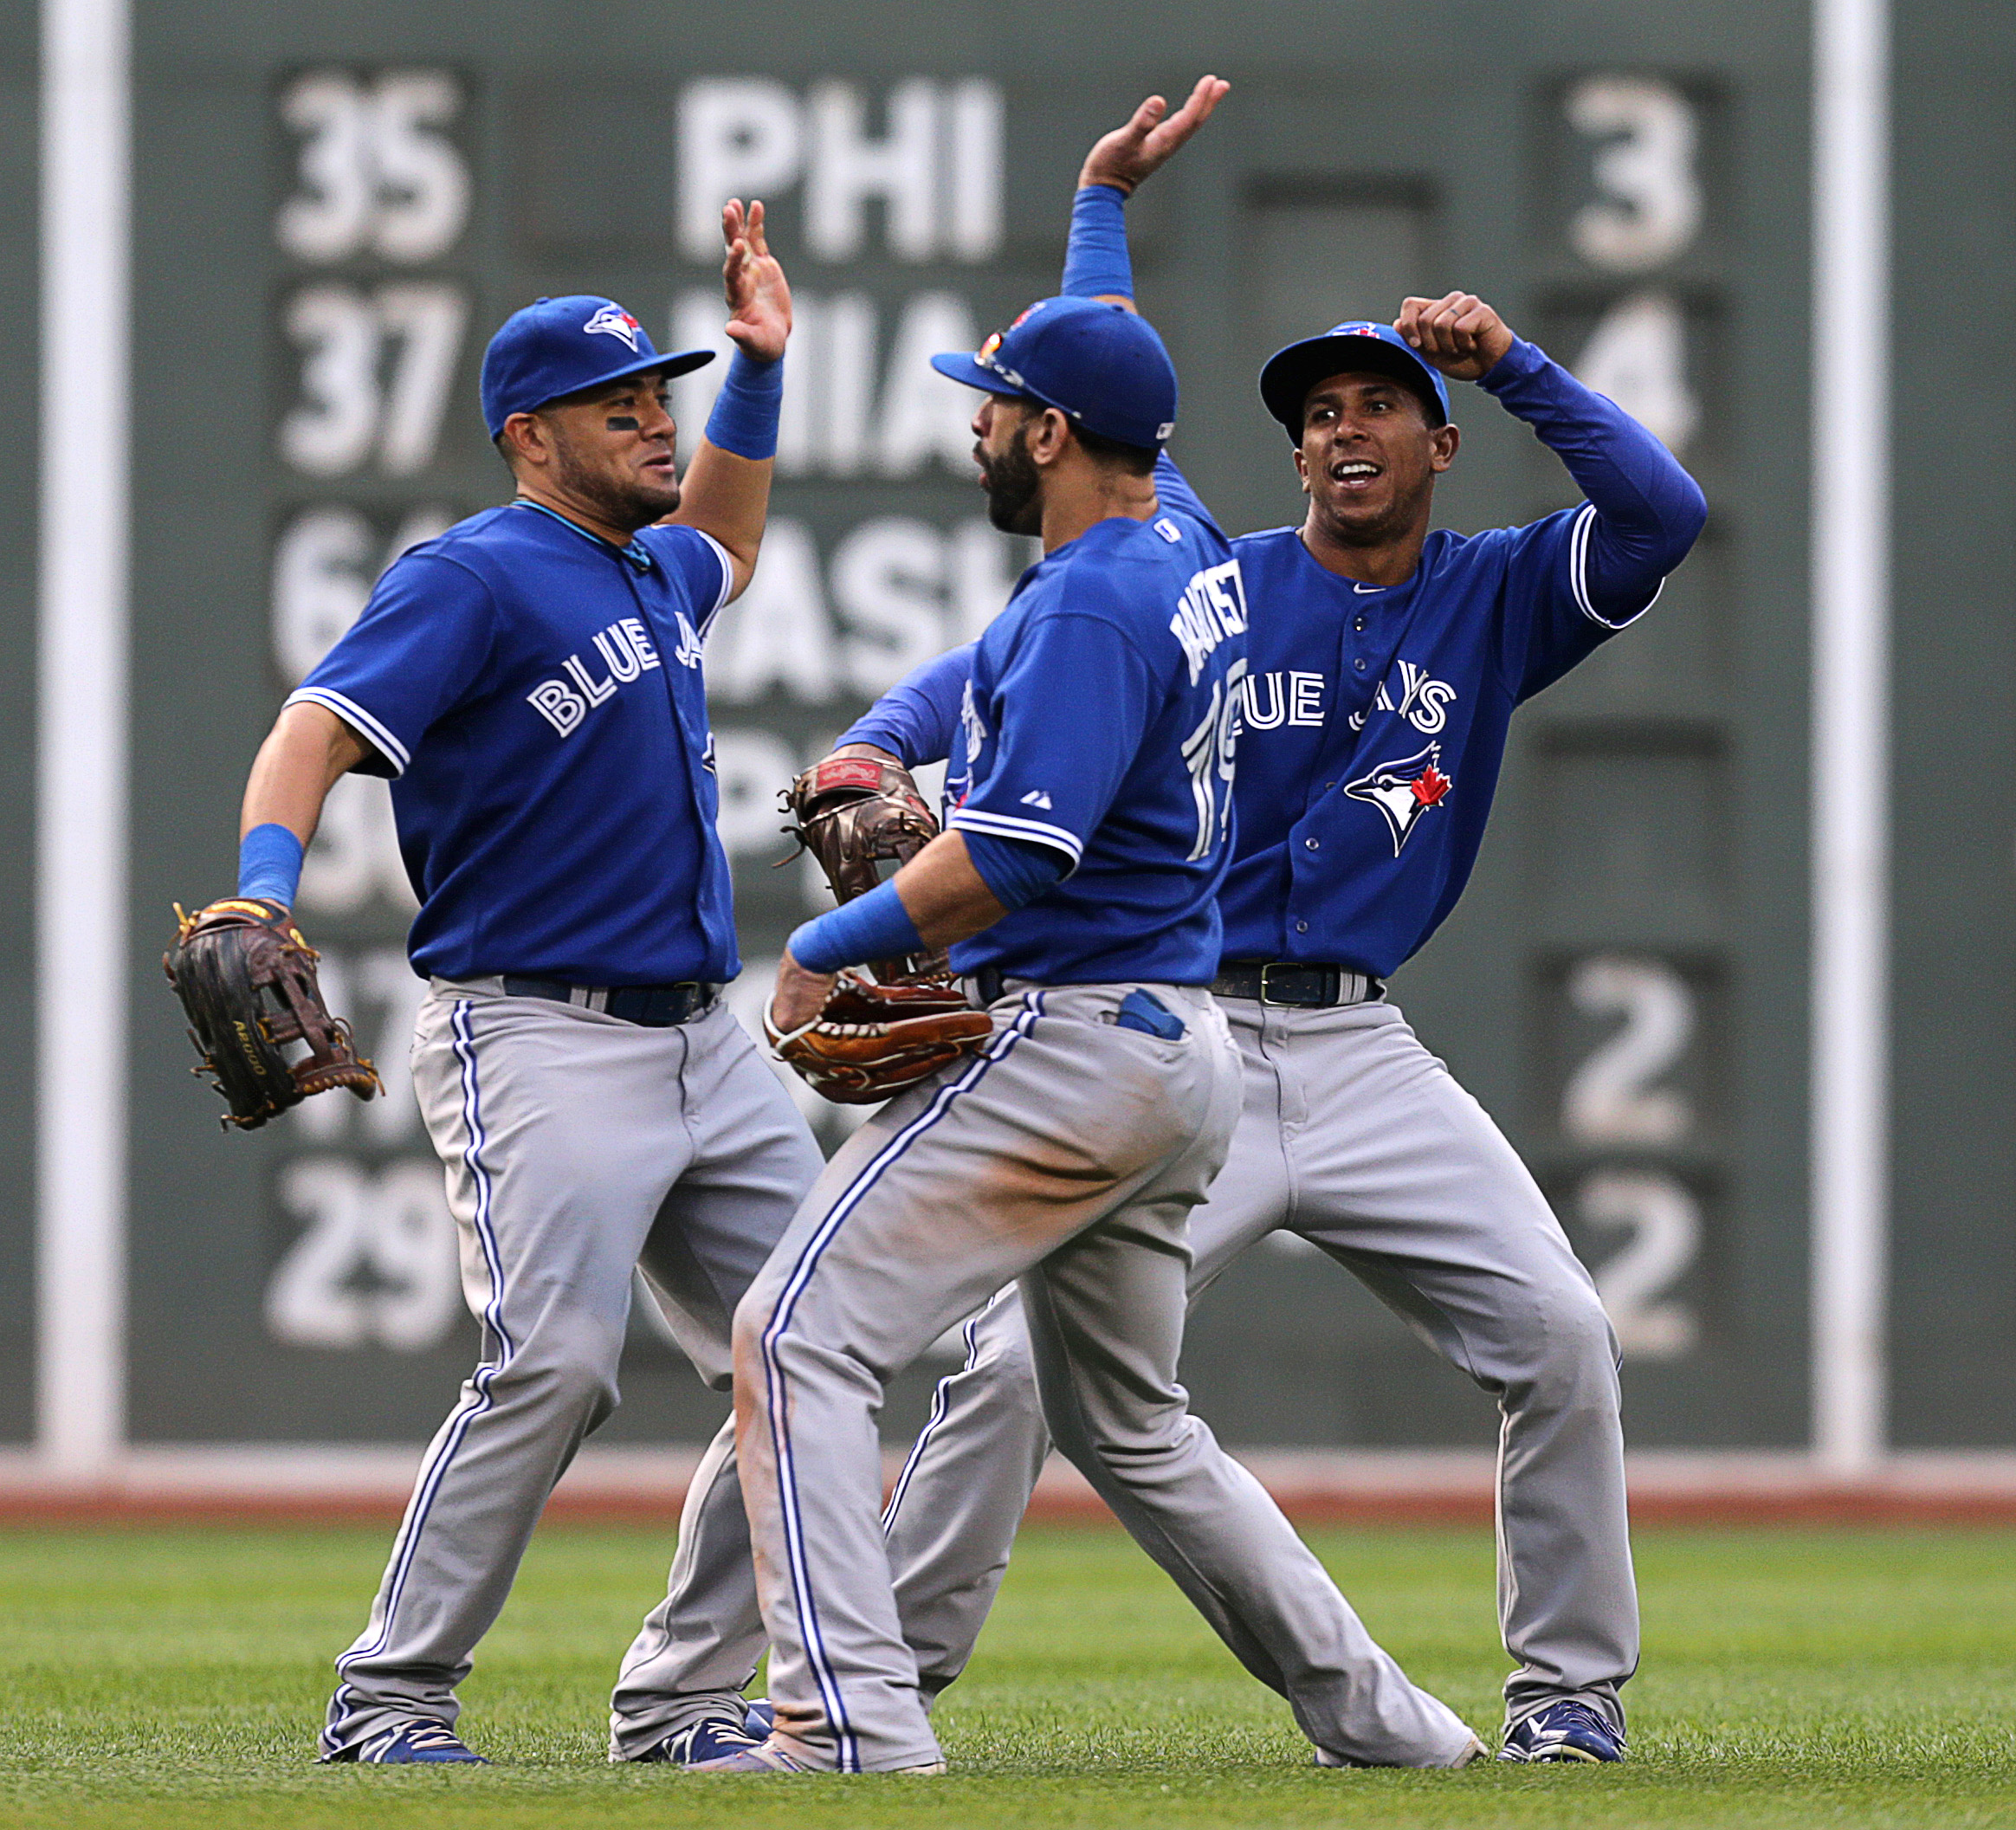 PHOTO:Melky Cabrera, Toronto, Jose Bautista, and Anthony Gose of the Toronto Blue Jays celebrate the 7-2 win with a dance in the outfield.